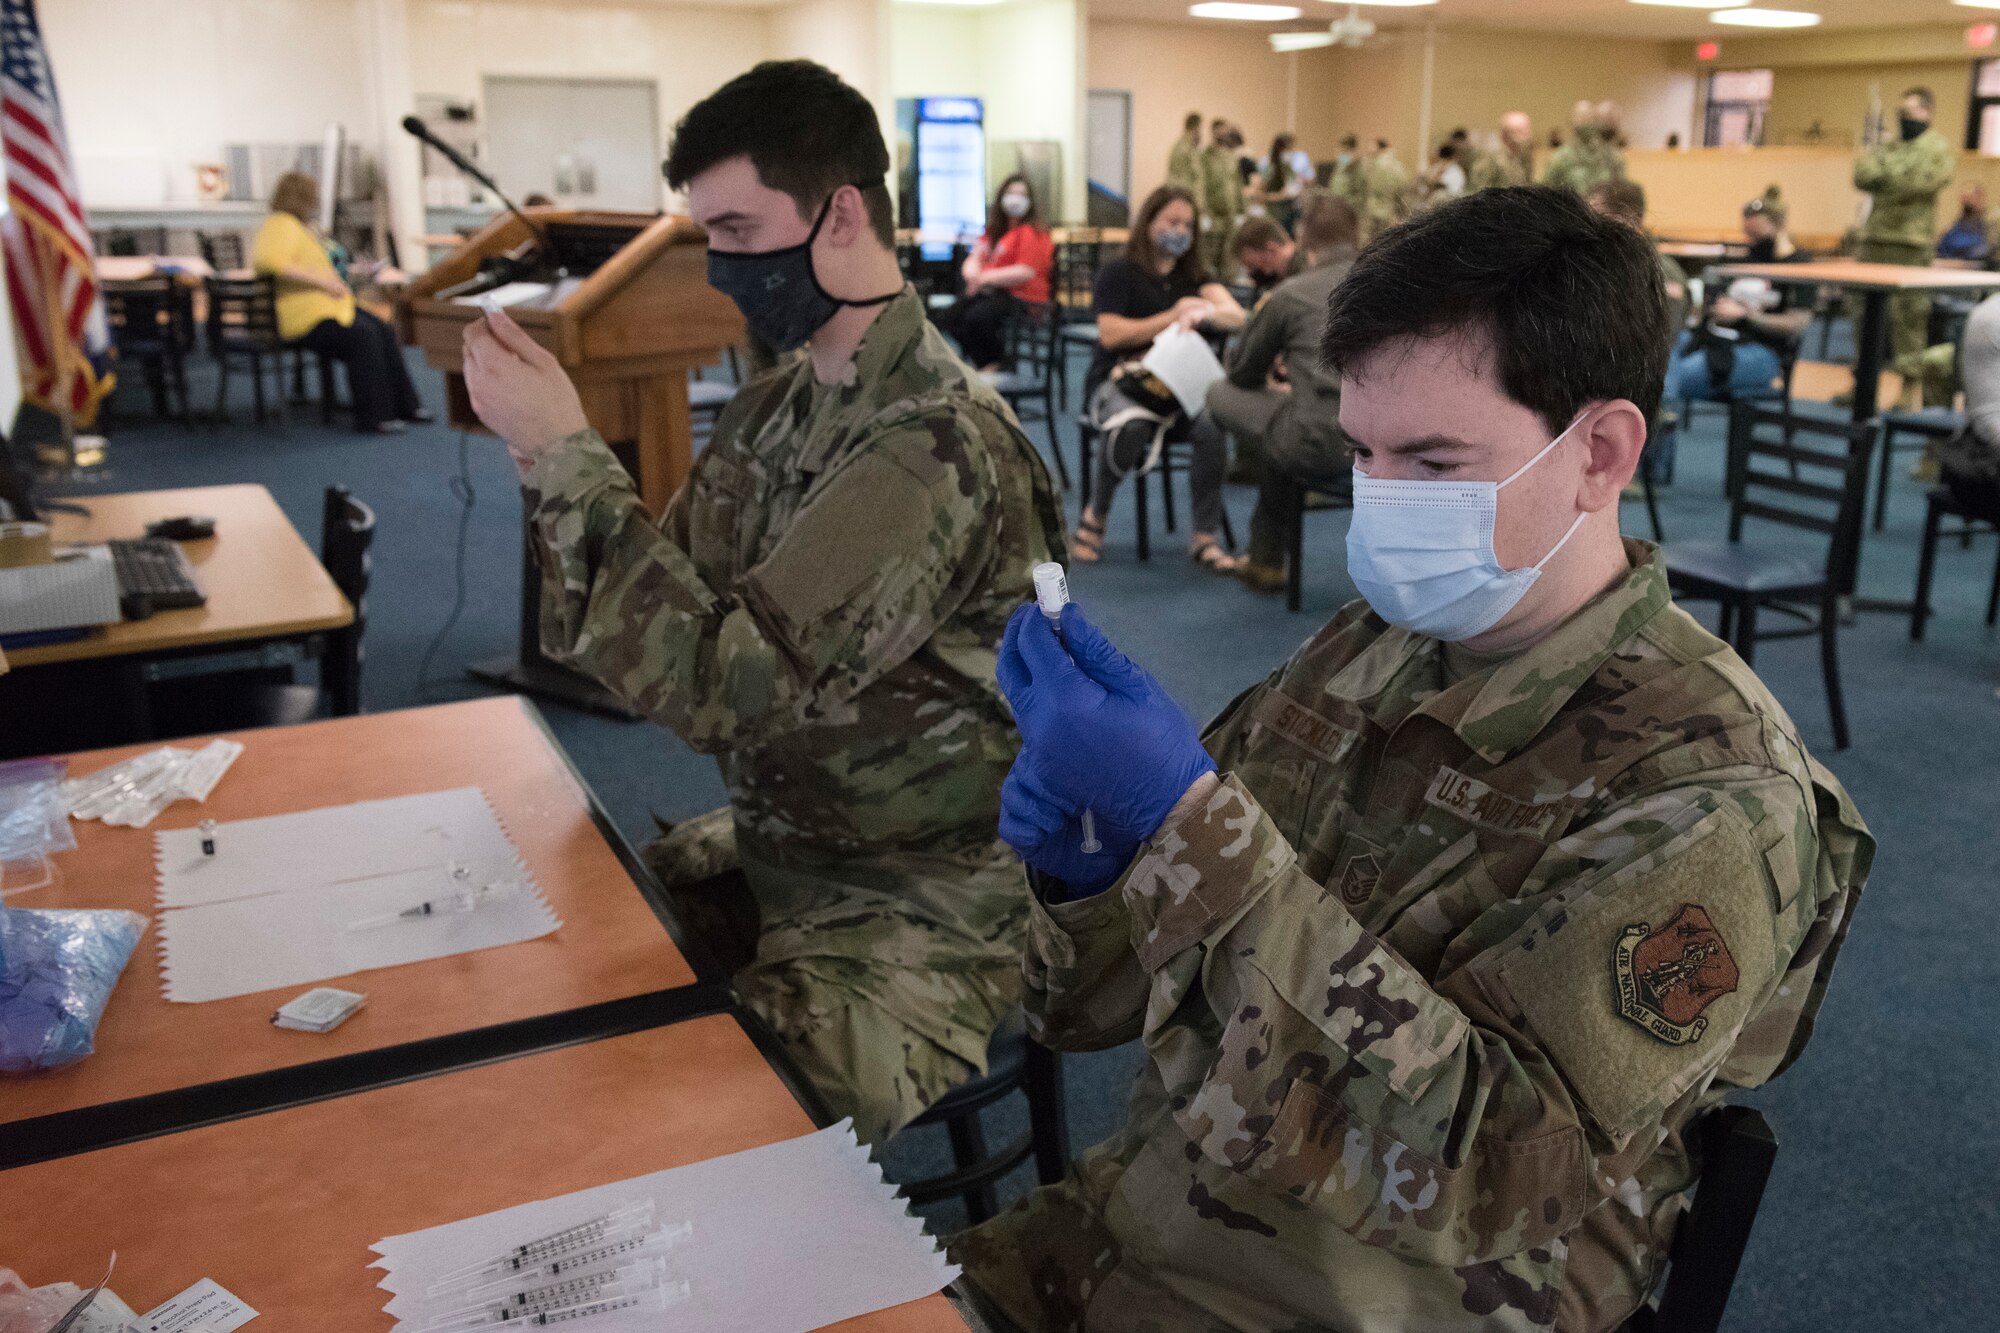 U.S. Air Force Staff Sgt. Ian Miller and Master Sgt. Matthew Stickley, aerospace medical technicians with the 167th Medical Group, currently assigned to the West Virginia National Guard’s Task Force Medical – East, prepare Pfizer COVID-19 vaccinations for military members and families in the 167th Airlift Wing dining facility, Martinsburg, West Virginia, Apr. 11, 2021.